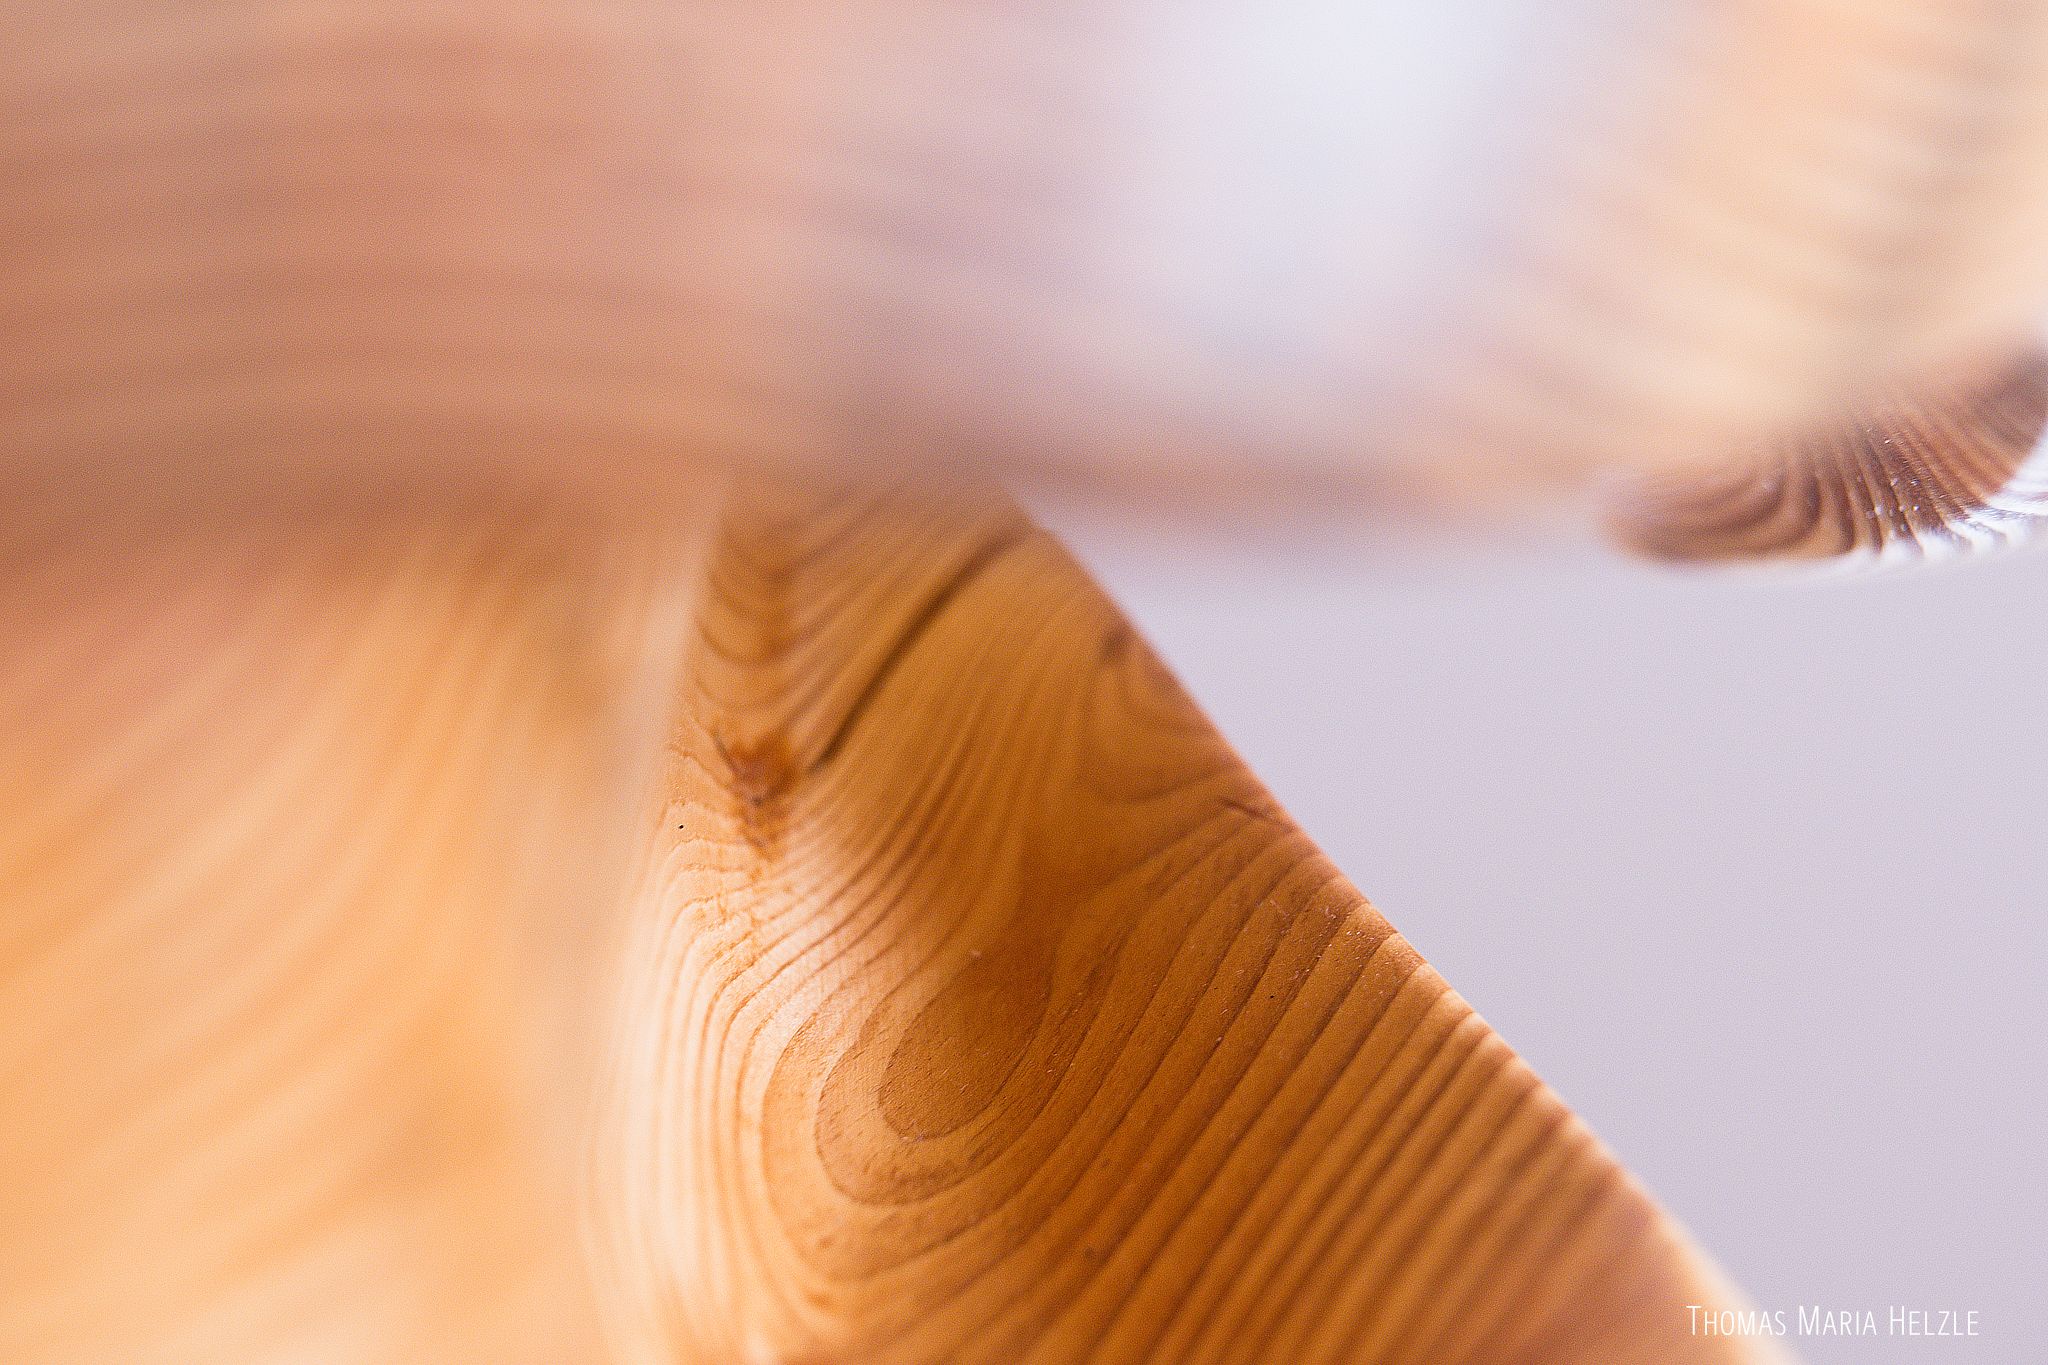 Macro of an inside part of the Transitions sculpture, showing year-ring patterns from the cutting of the smooth flowing forms. In the foreground some parts of the sculpture are extremely blurred by depth of field and become almost transparent, like a fog.